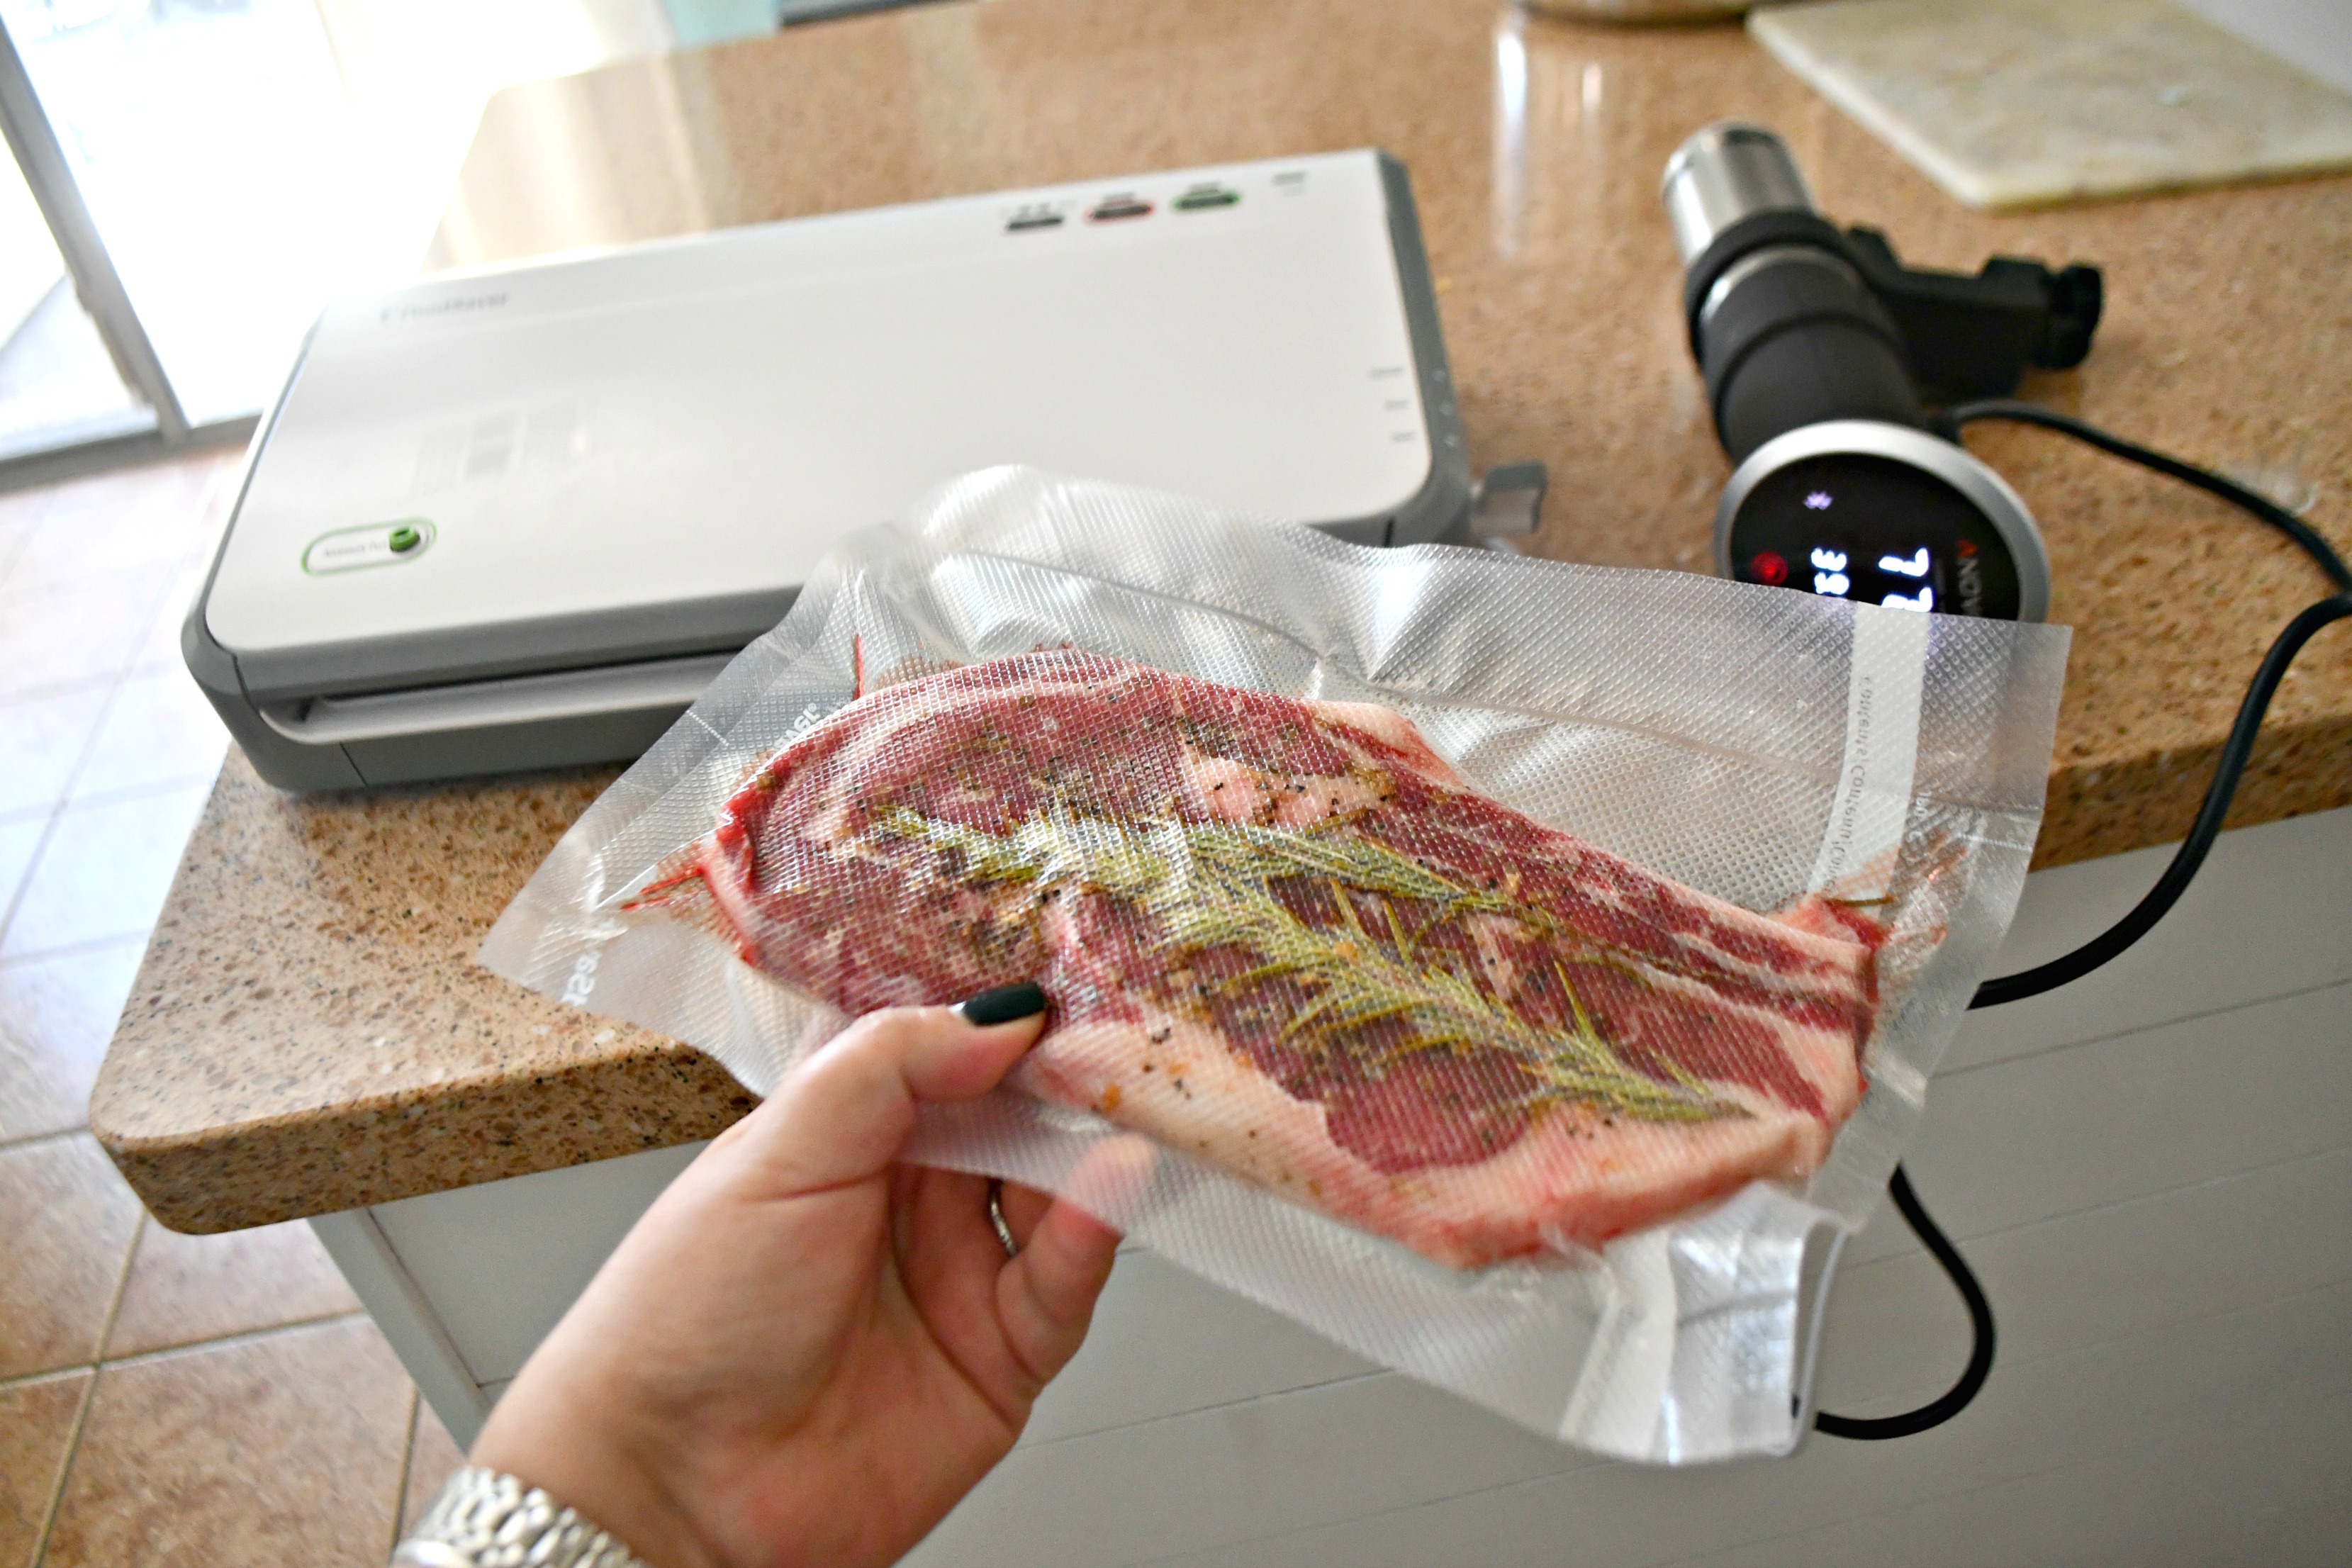 Make the Best Steak Using the Sous Vide method! Pictured here is a vacuum sealed steak with herbs